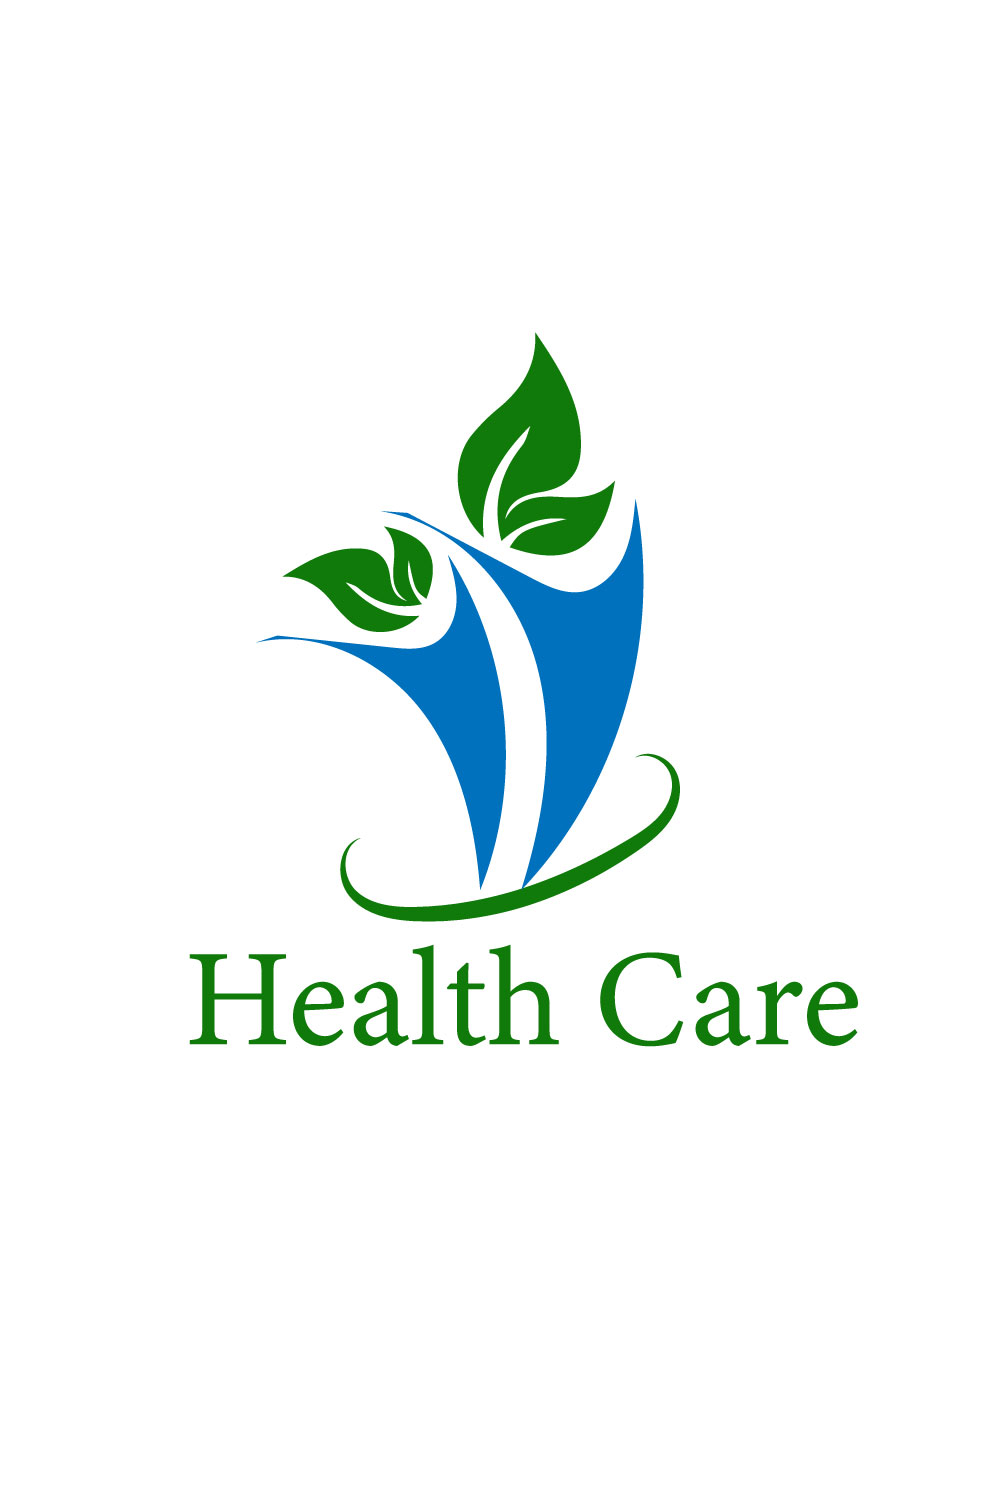 Free Wellness and health logo pinterest preview image.